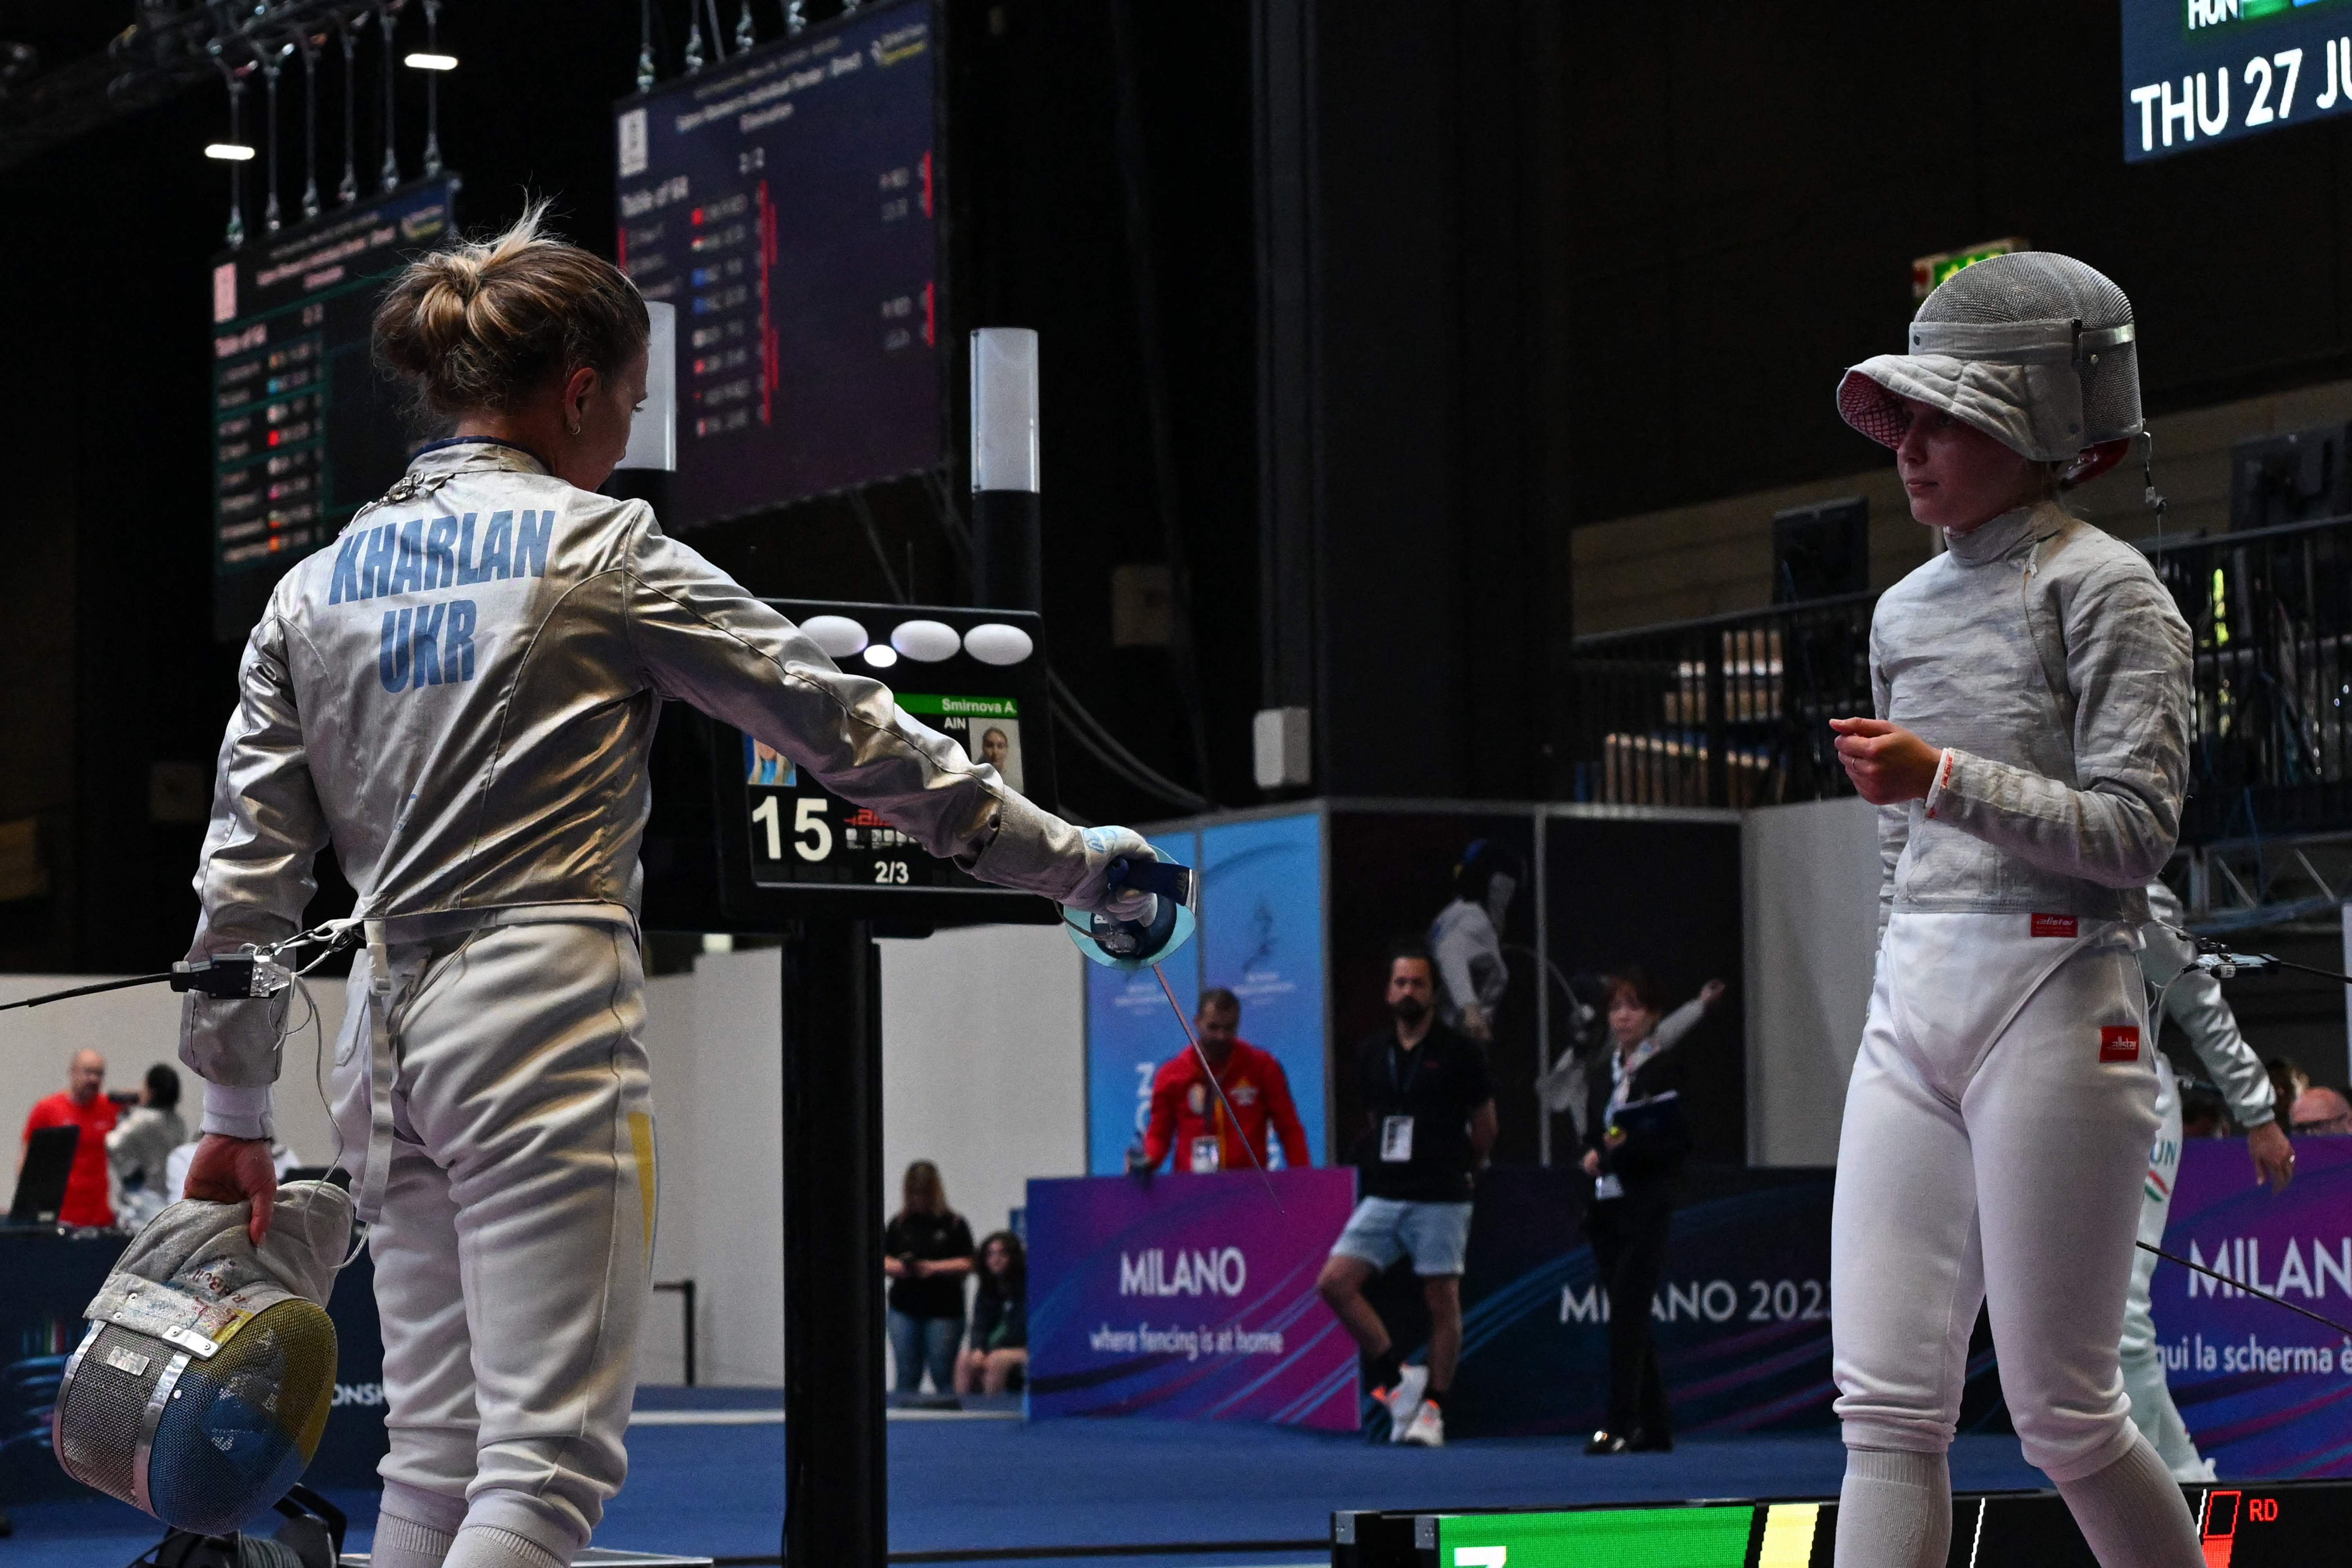 Olga Kharlan offered her sabre to Anna Smirnova to touch blades but refused to shake hands